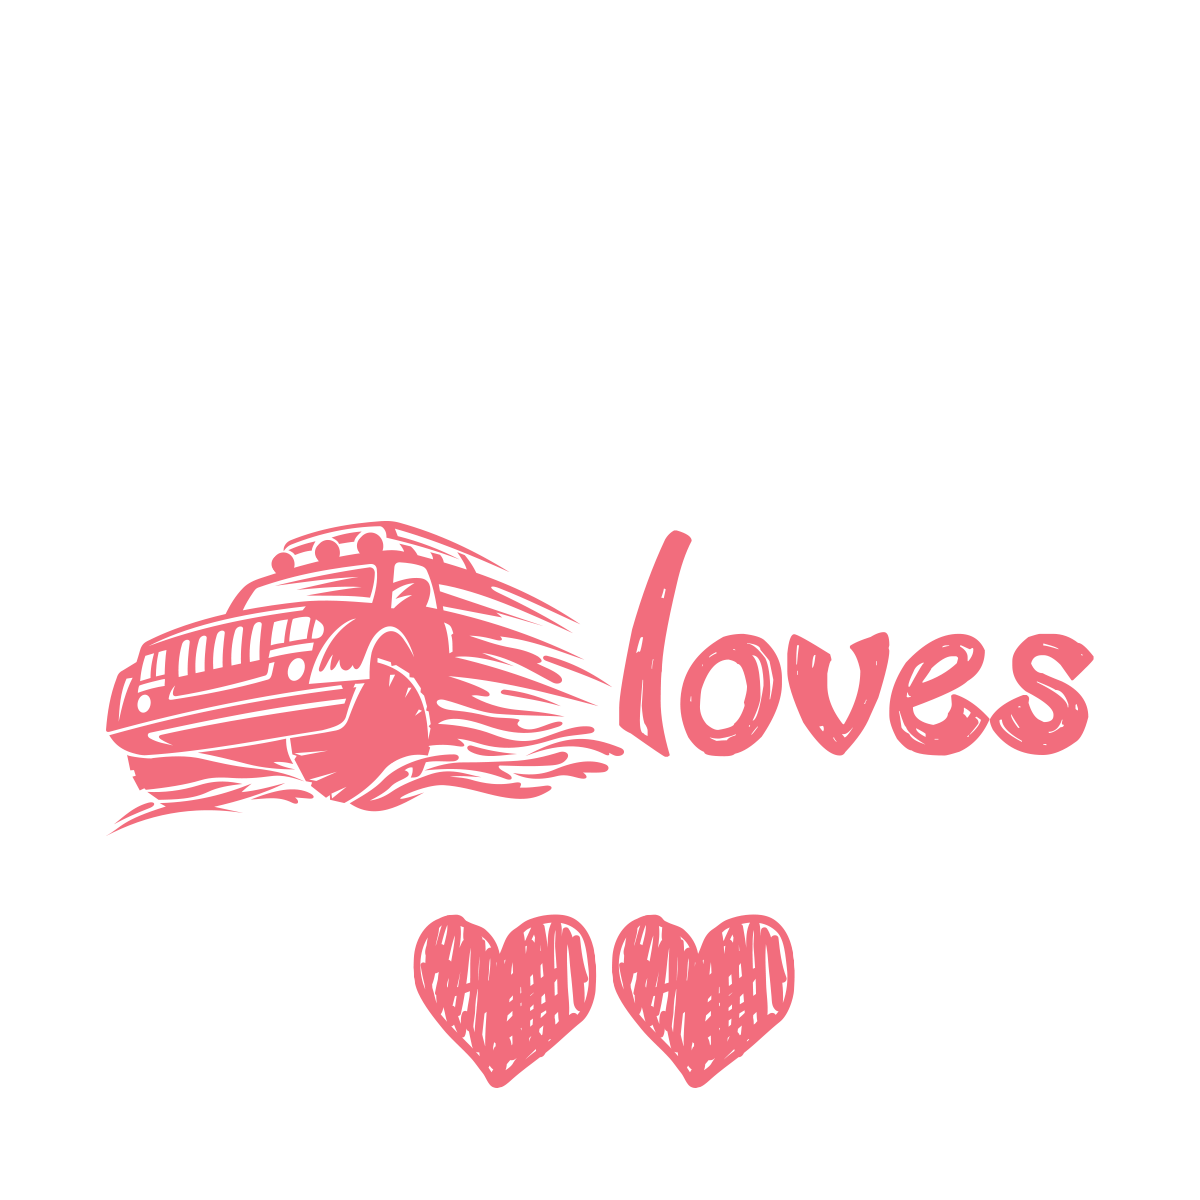 This Girl Loves To Drive Her Jeep